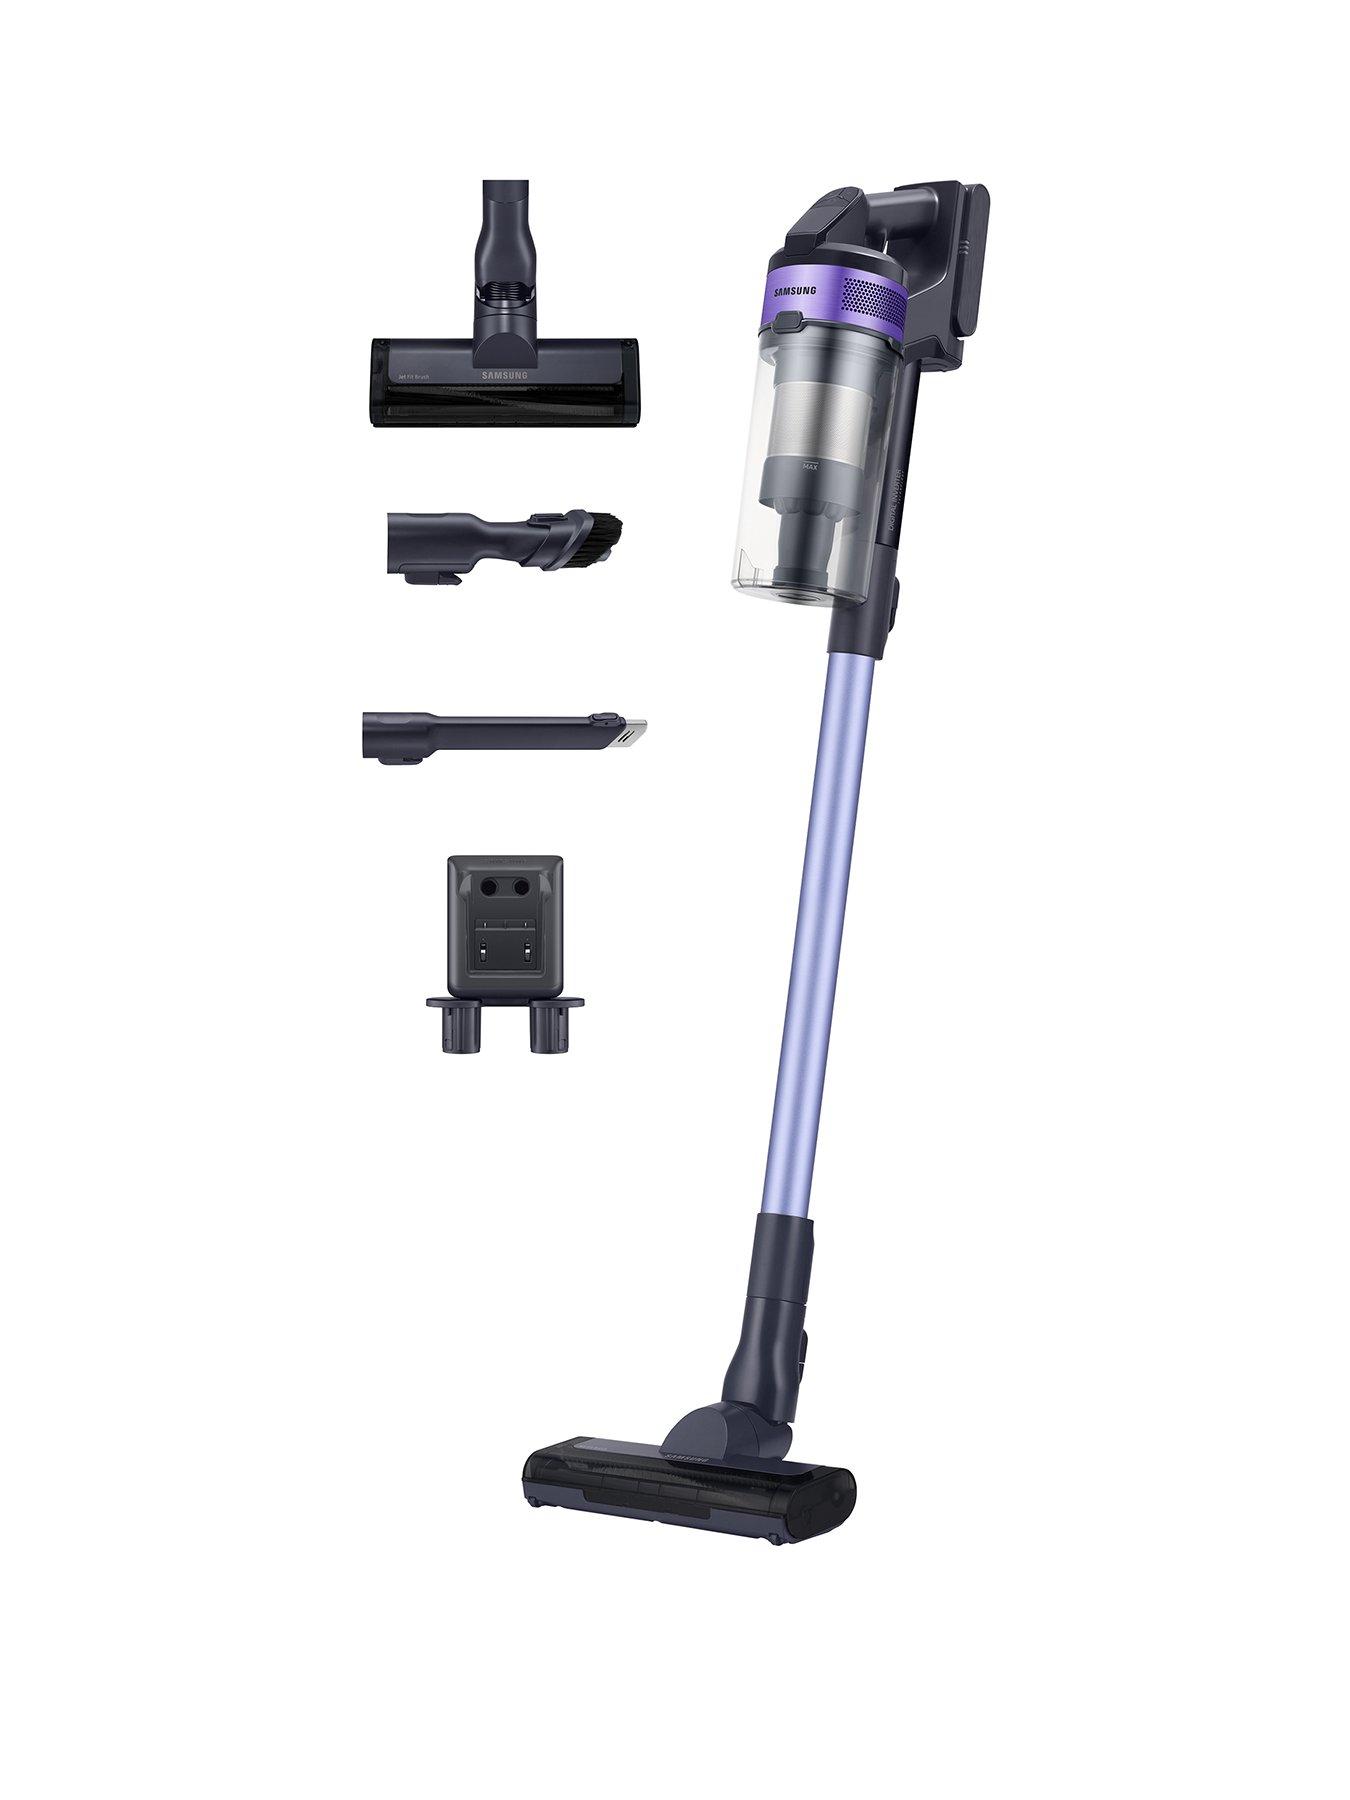 600 ml Capacity HEPA Filter Tower RVL30 Cordless Upright Vacuum Cleaner 120 W 3-in-1 45 Minute Runtime Rose Gold 22.2V Ultra Lightweight Portable